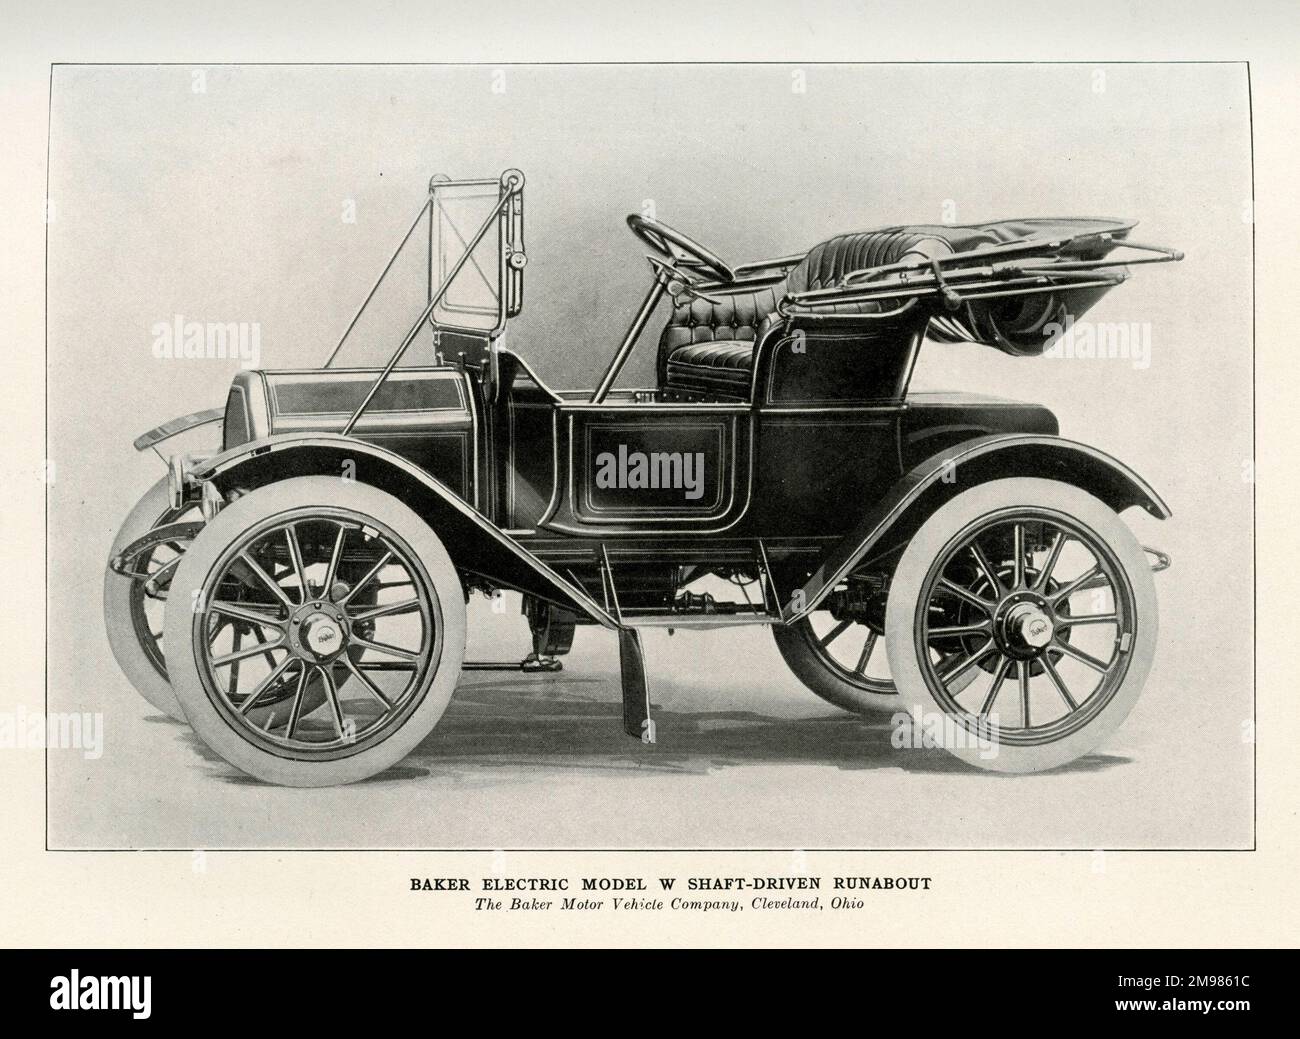 Baker Electric Model W Shaft-Driven Runabout, The Baker Motor Vehicle Company, Cleveland, Ohio, USA. Stockfoto